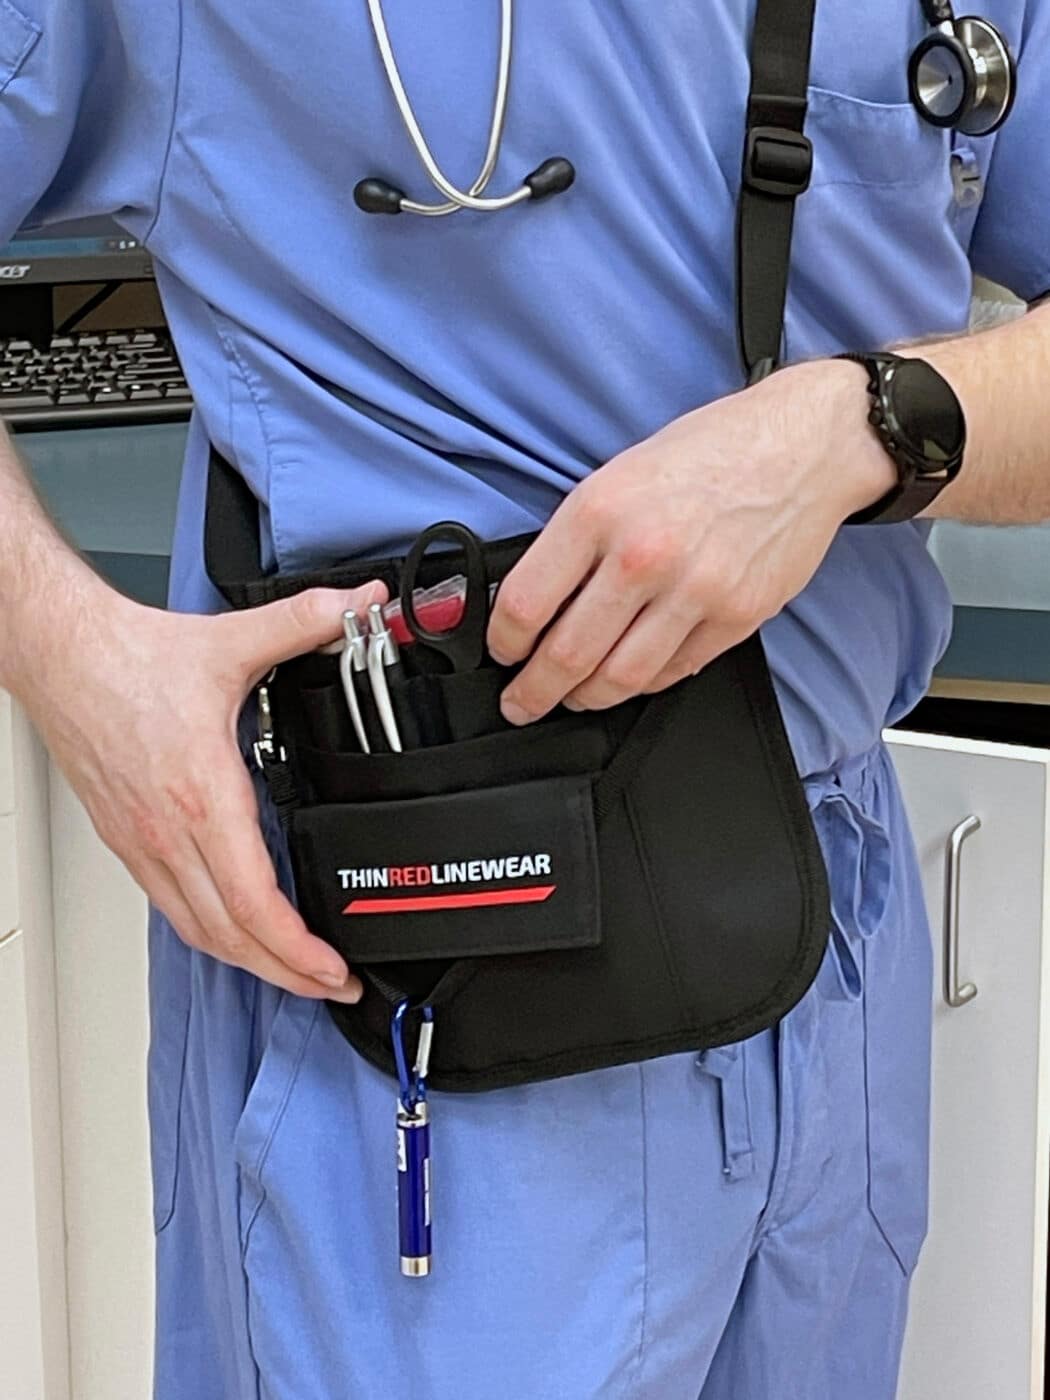 Thin Red Line Wear Go Bag being worn by medic personnel in scrubs